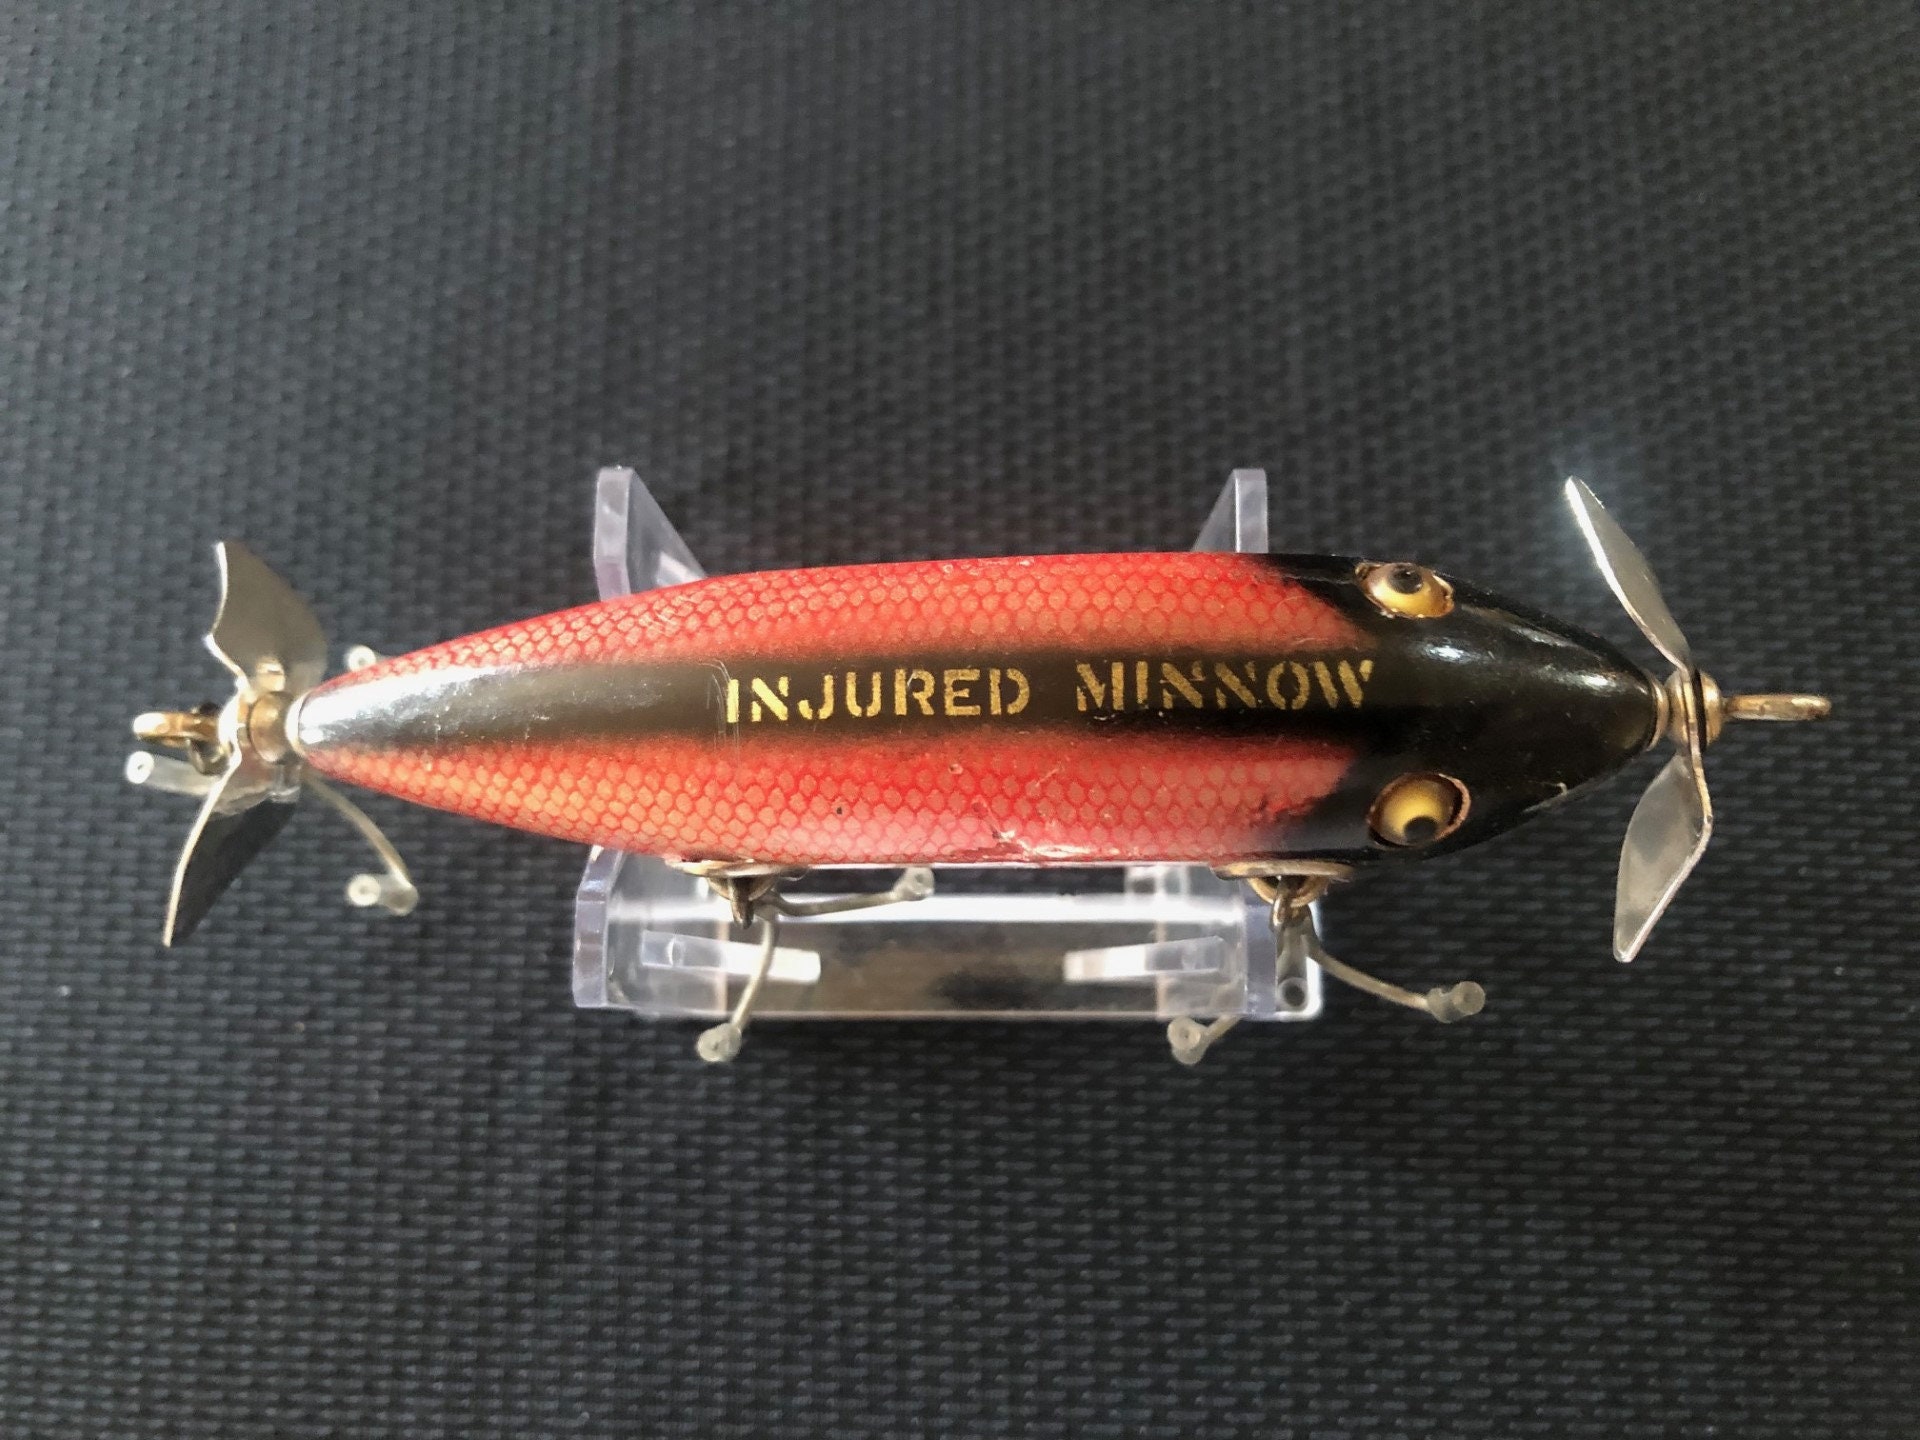 1960'S Creek Chub Injured Minnow 1505 Wooden With Glass Eyes Rare